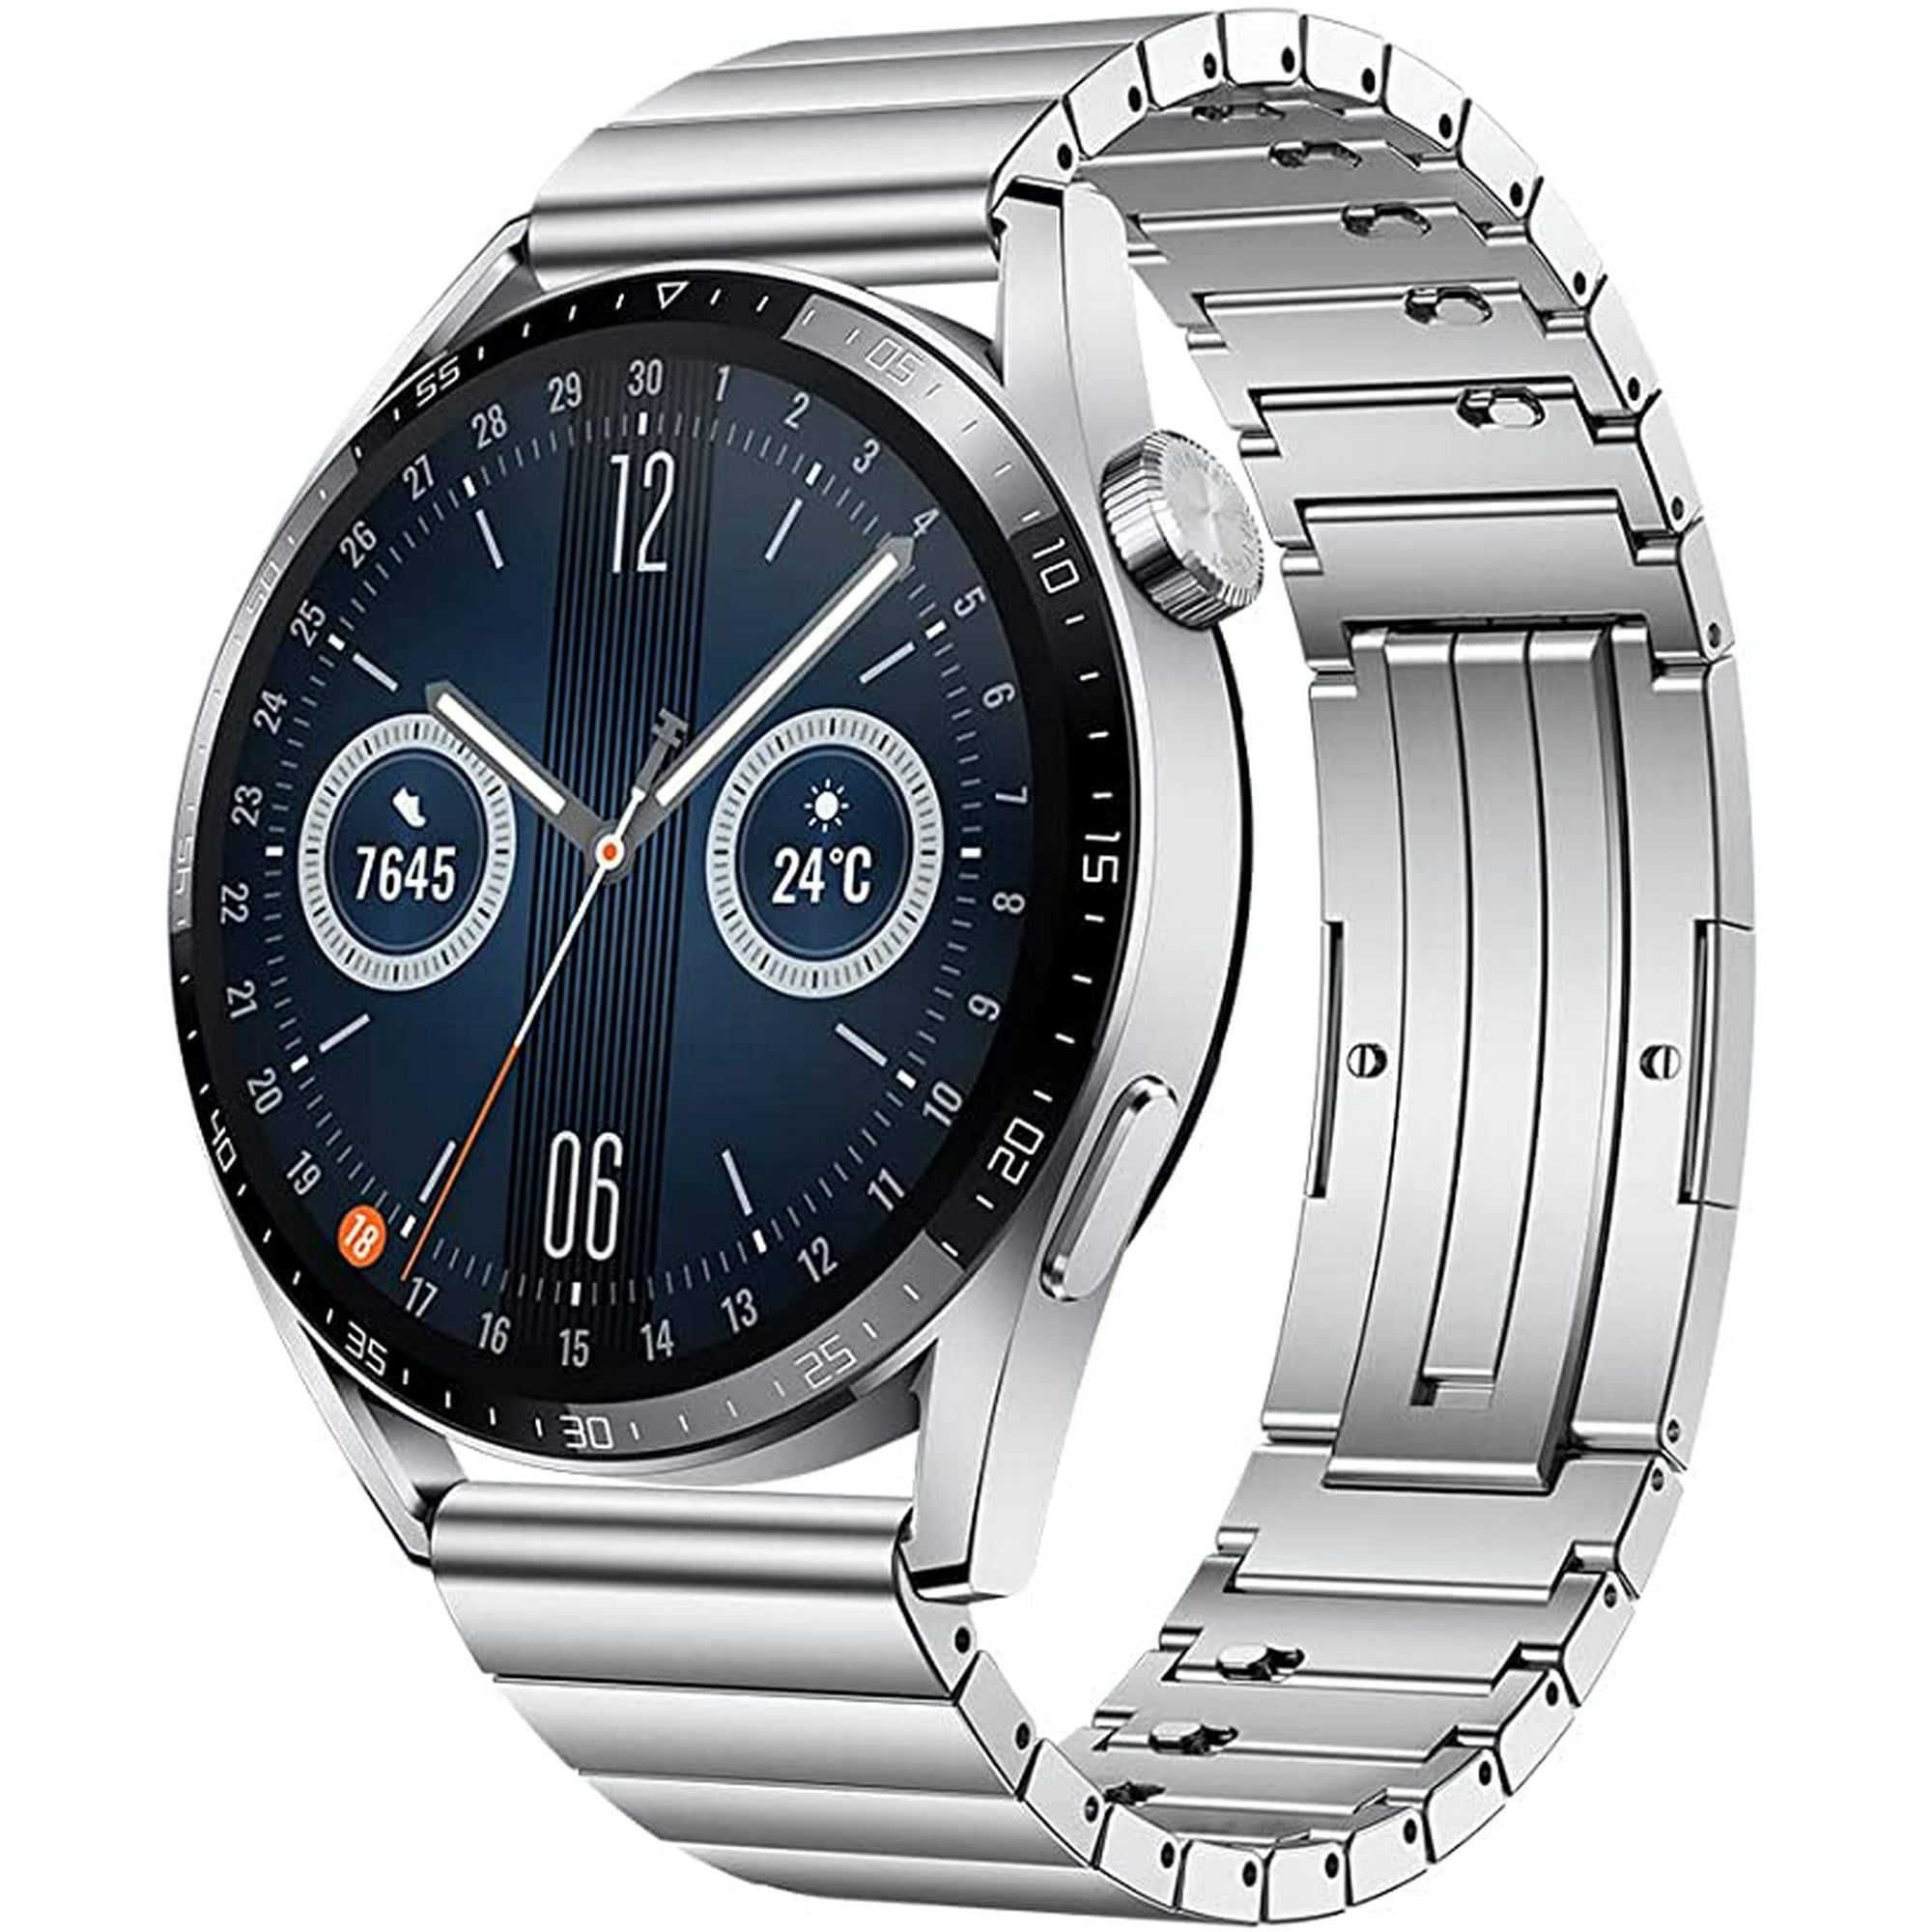 HUAWEI Watch GT 3 - 46mm Smartwatch - All-Day Health Monitoring